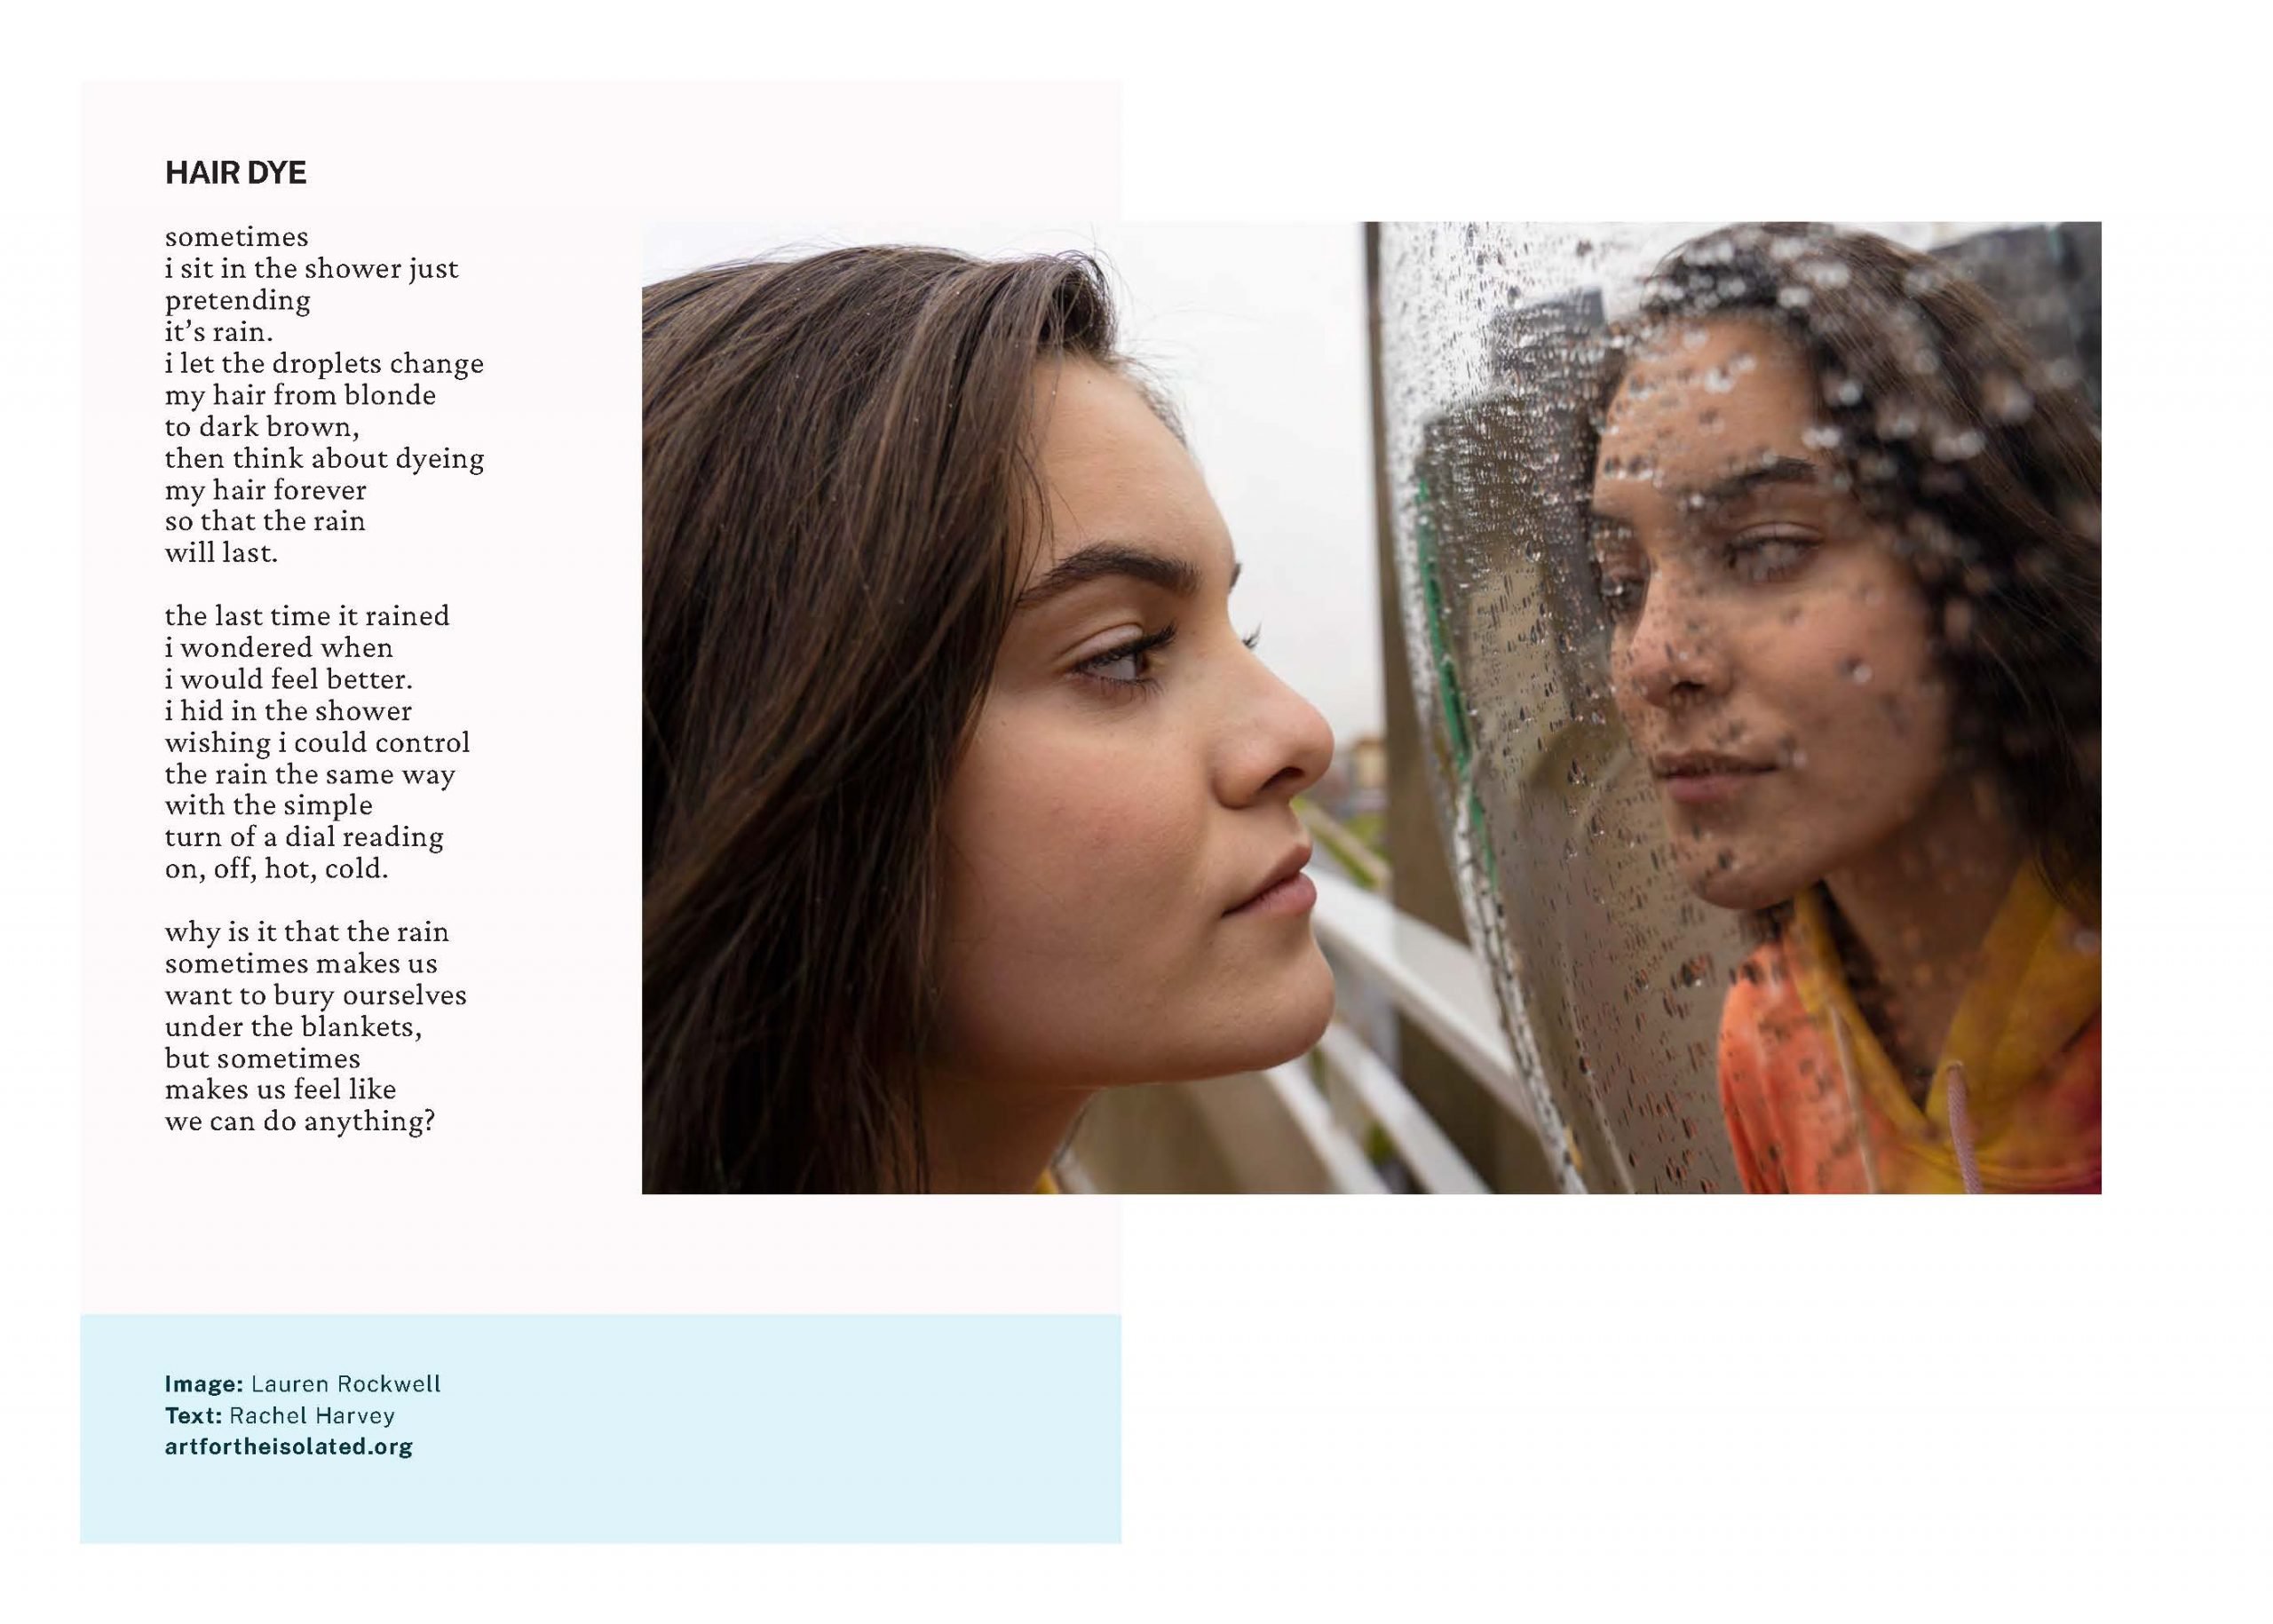 Hair Dye poem on photograph showing woman's reflection.